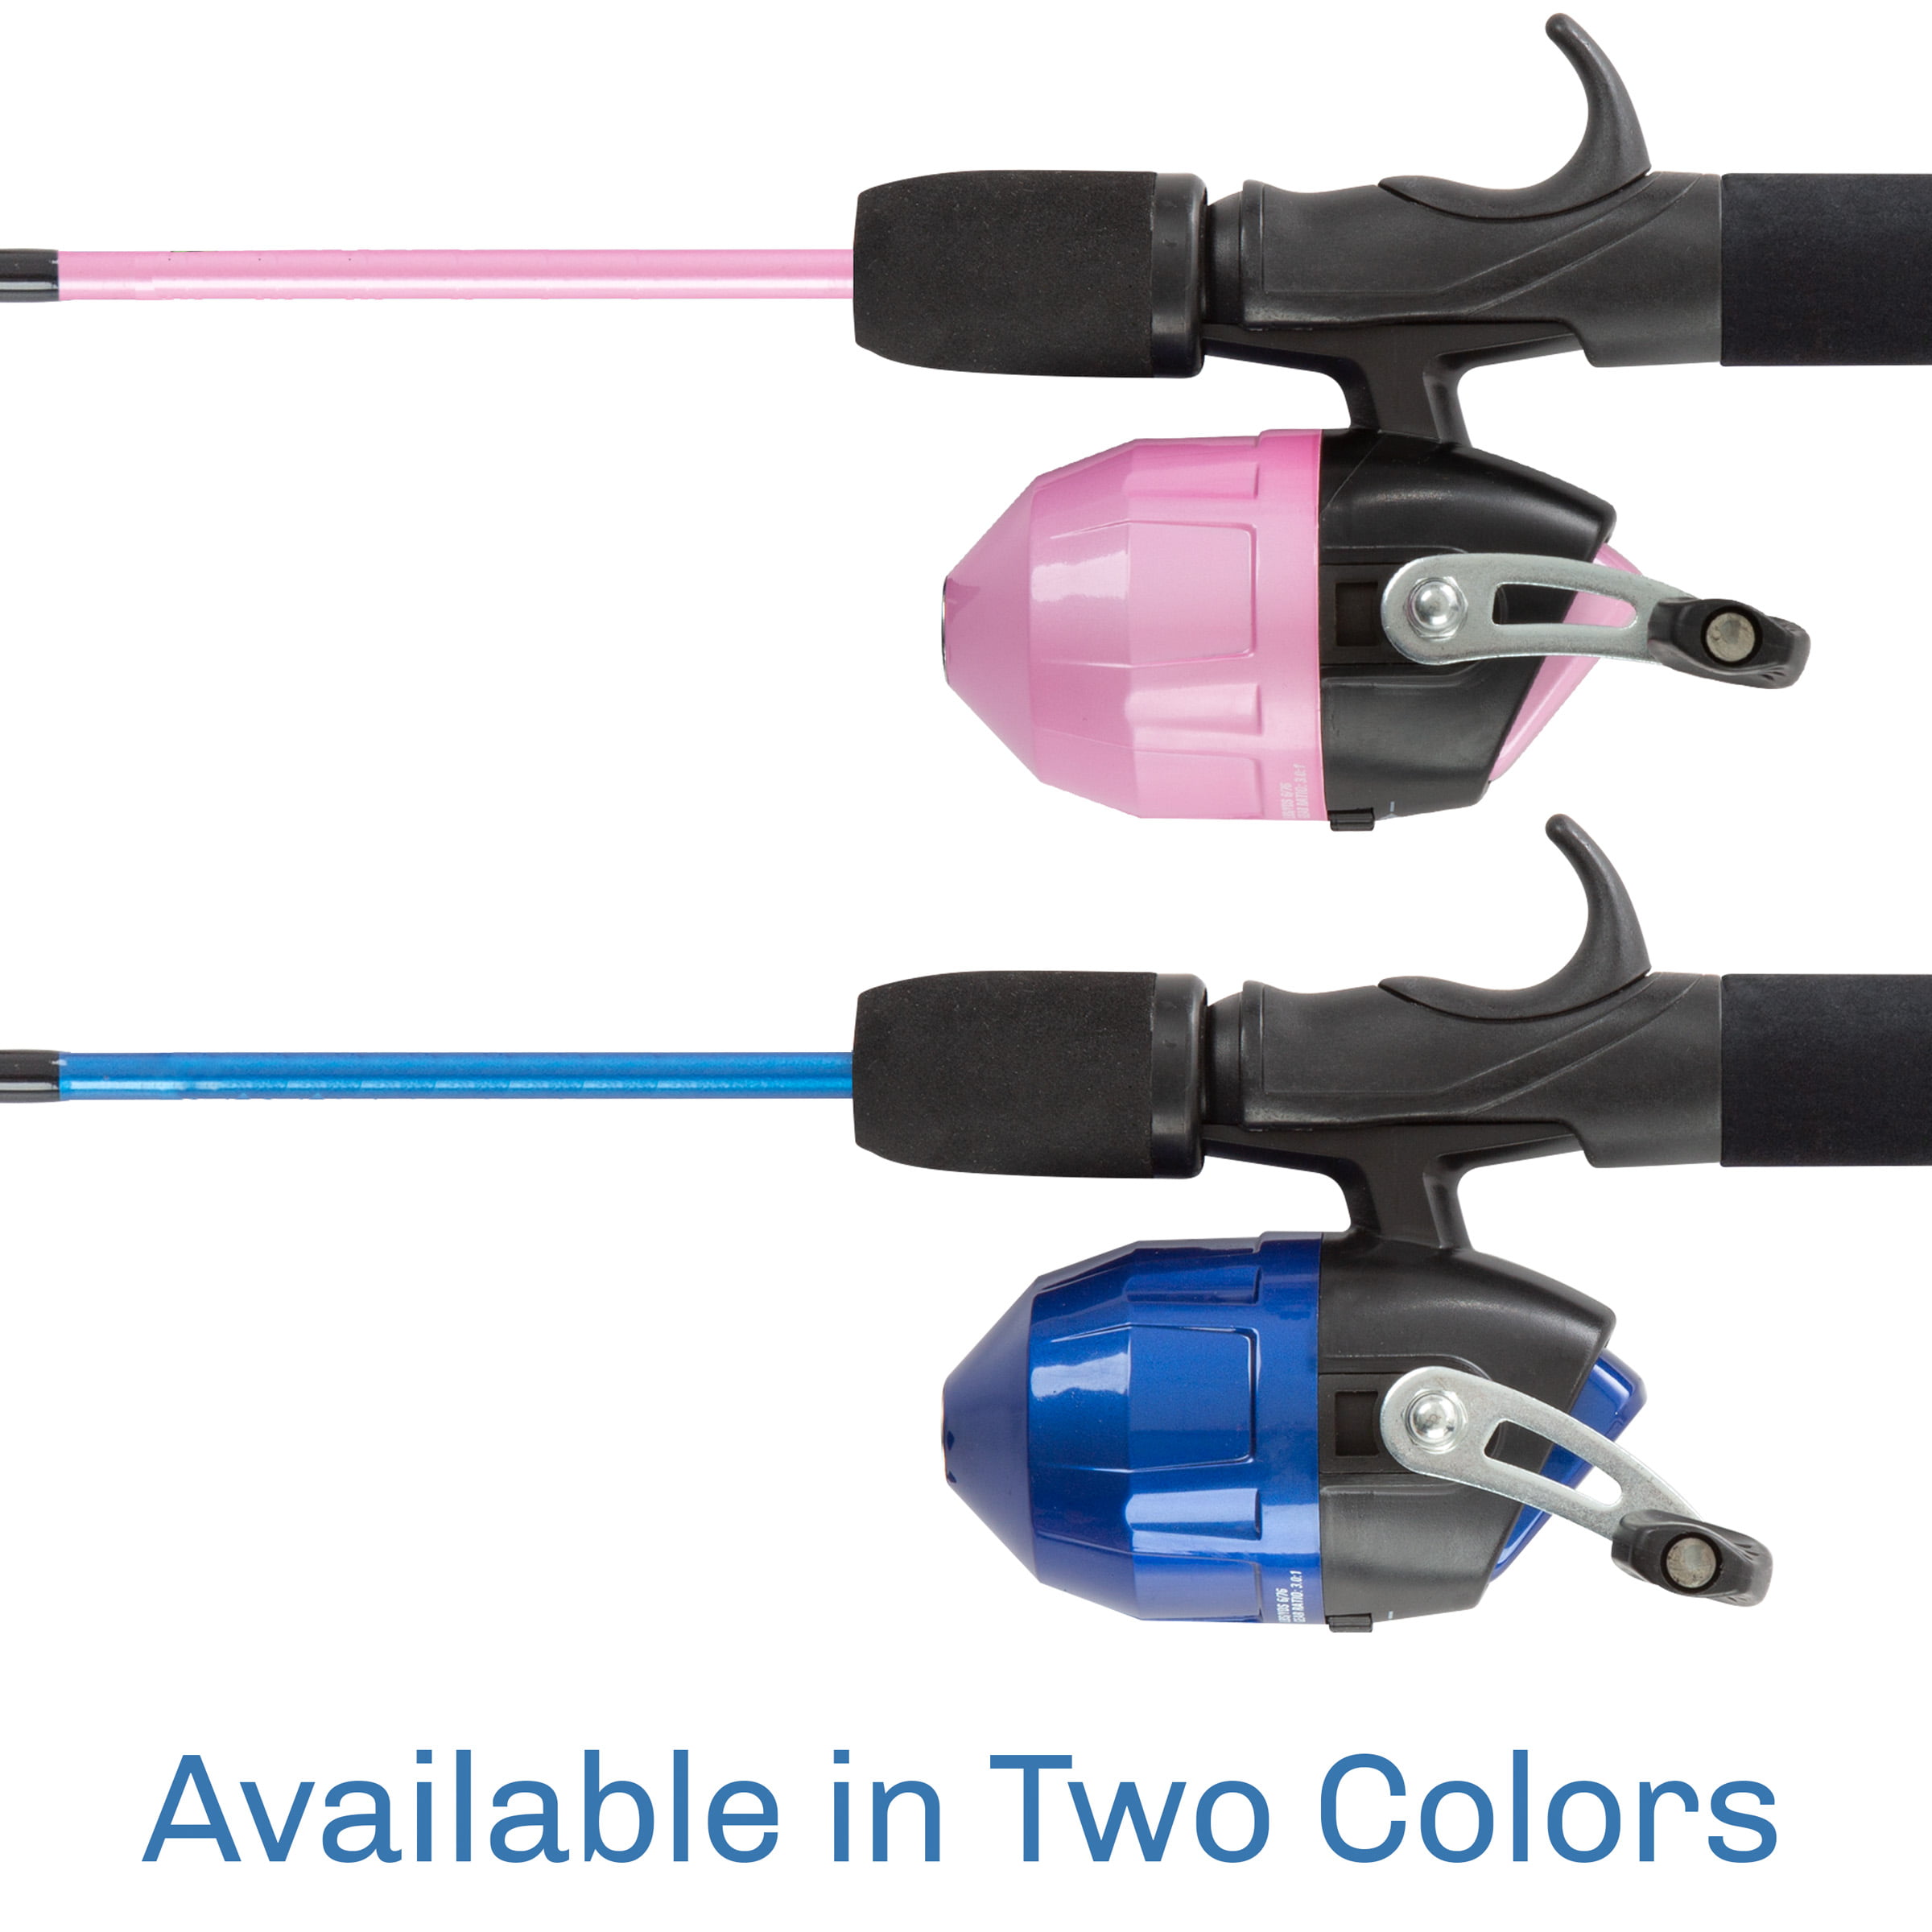 Youth Fishing Rod & Reel Combo-4'2” Fiberglass Pole, Spincast Reel &  8-Piece Tackle Kit for Kids & Beginners-Shallow Series (Pink) 